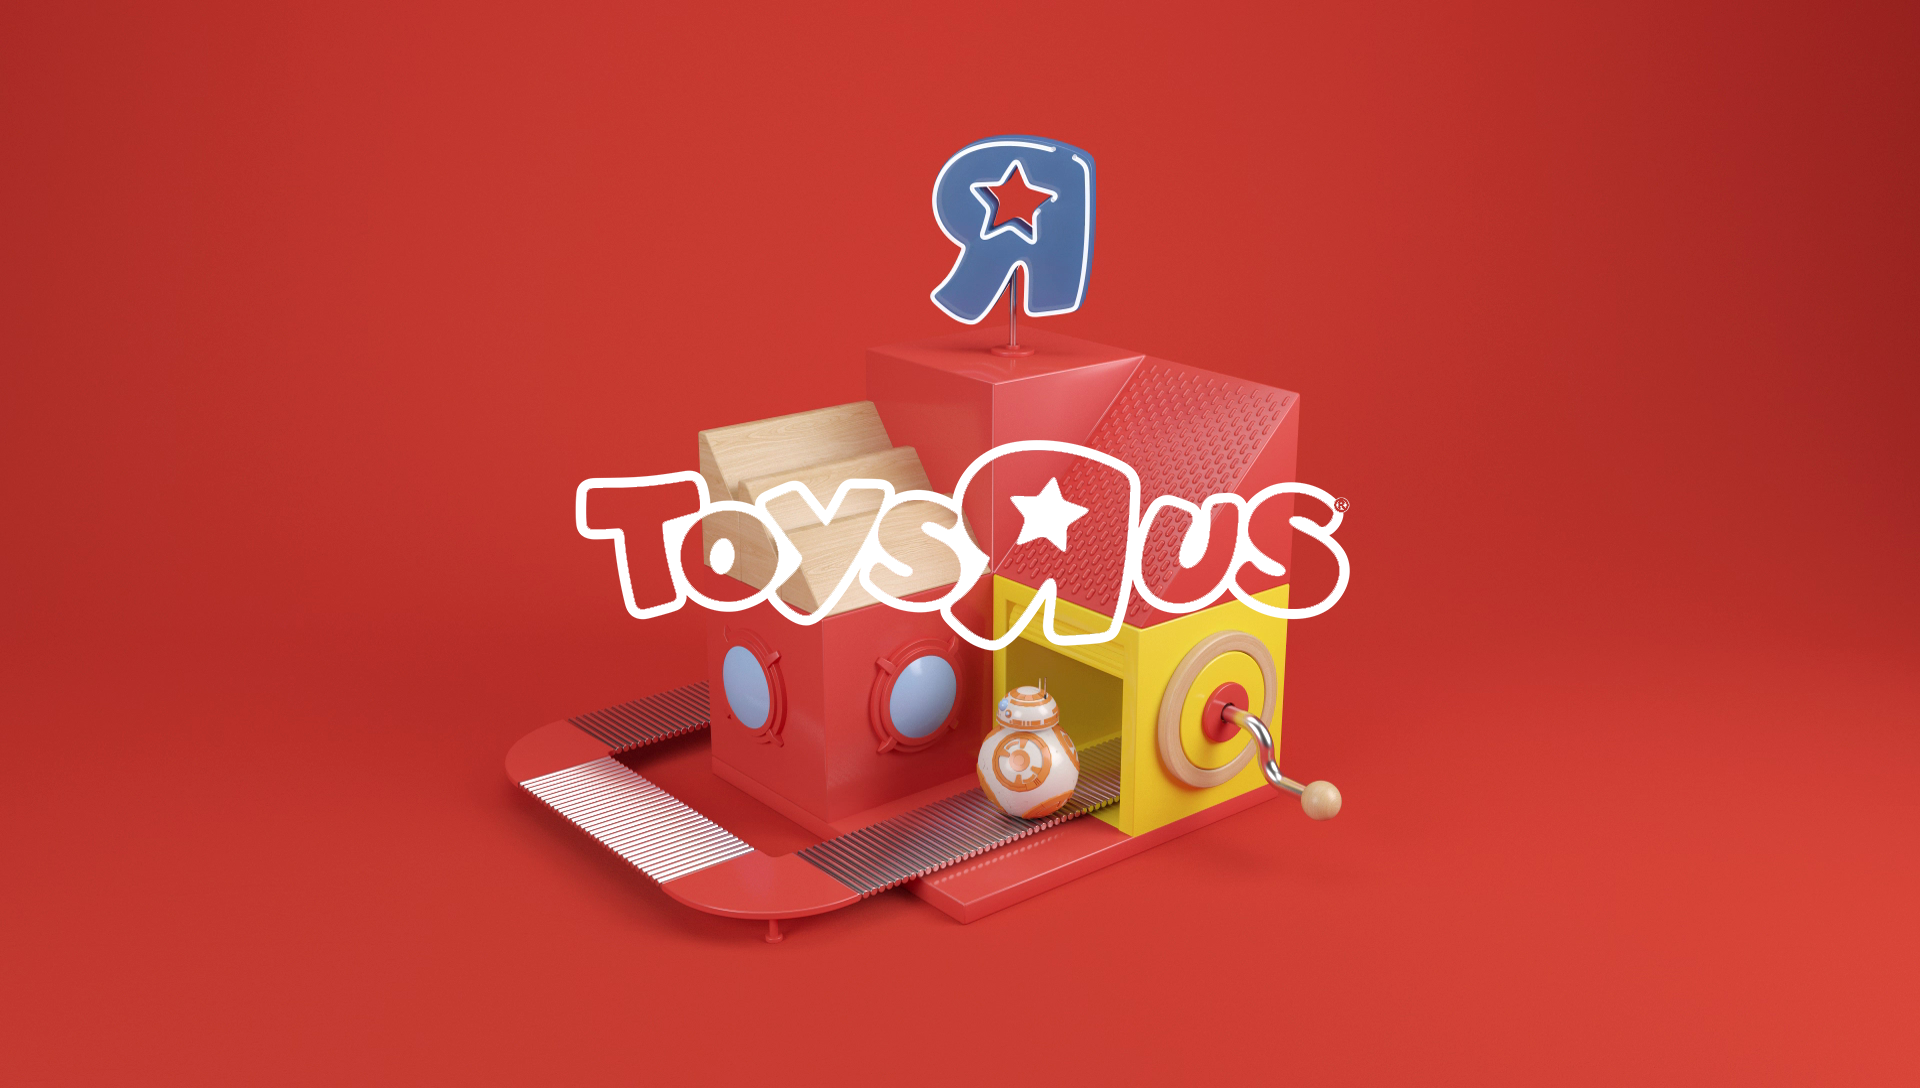 Toys"R"Us toy factory designed by Lippincott.